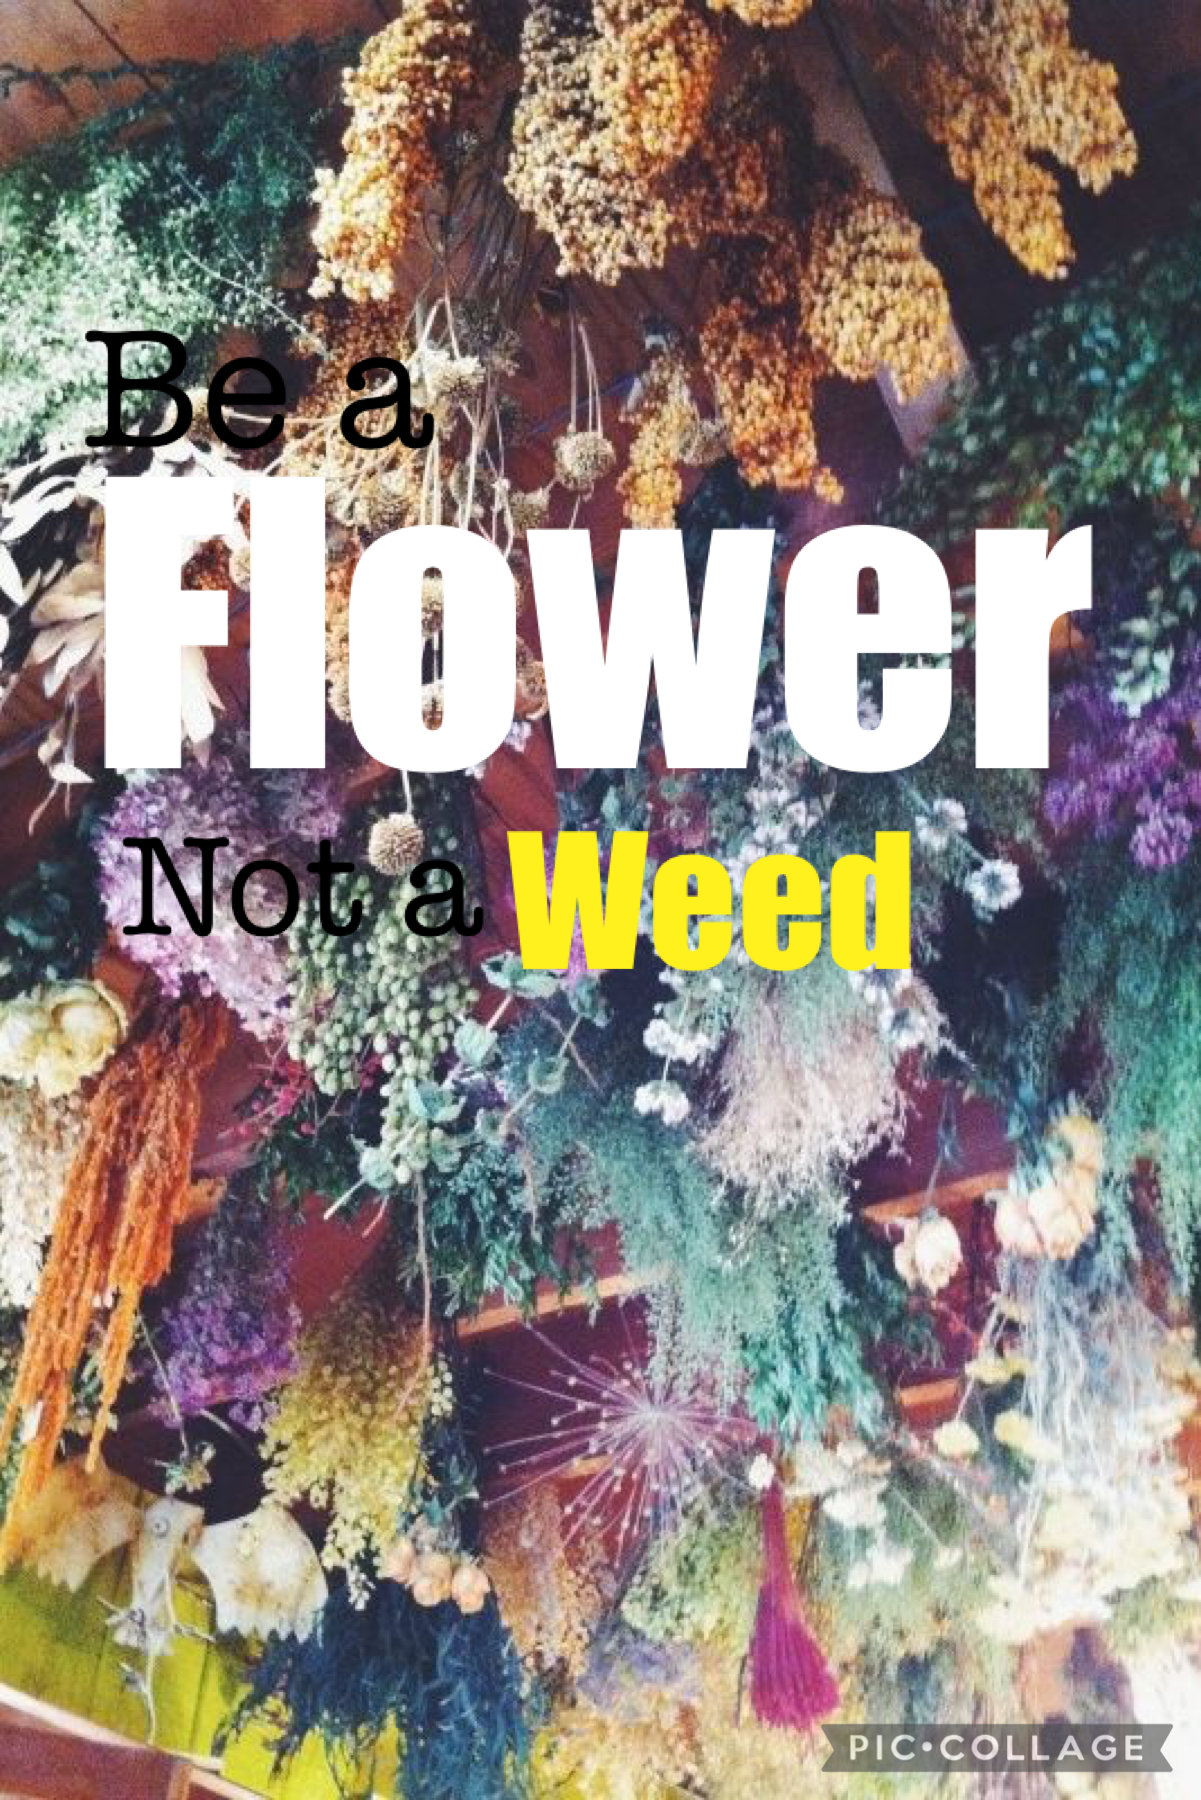 Be a flower not a weed